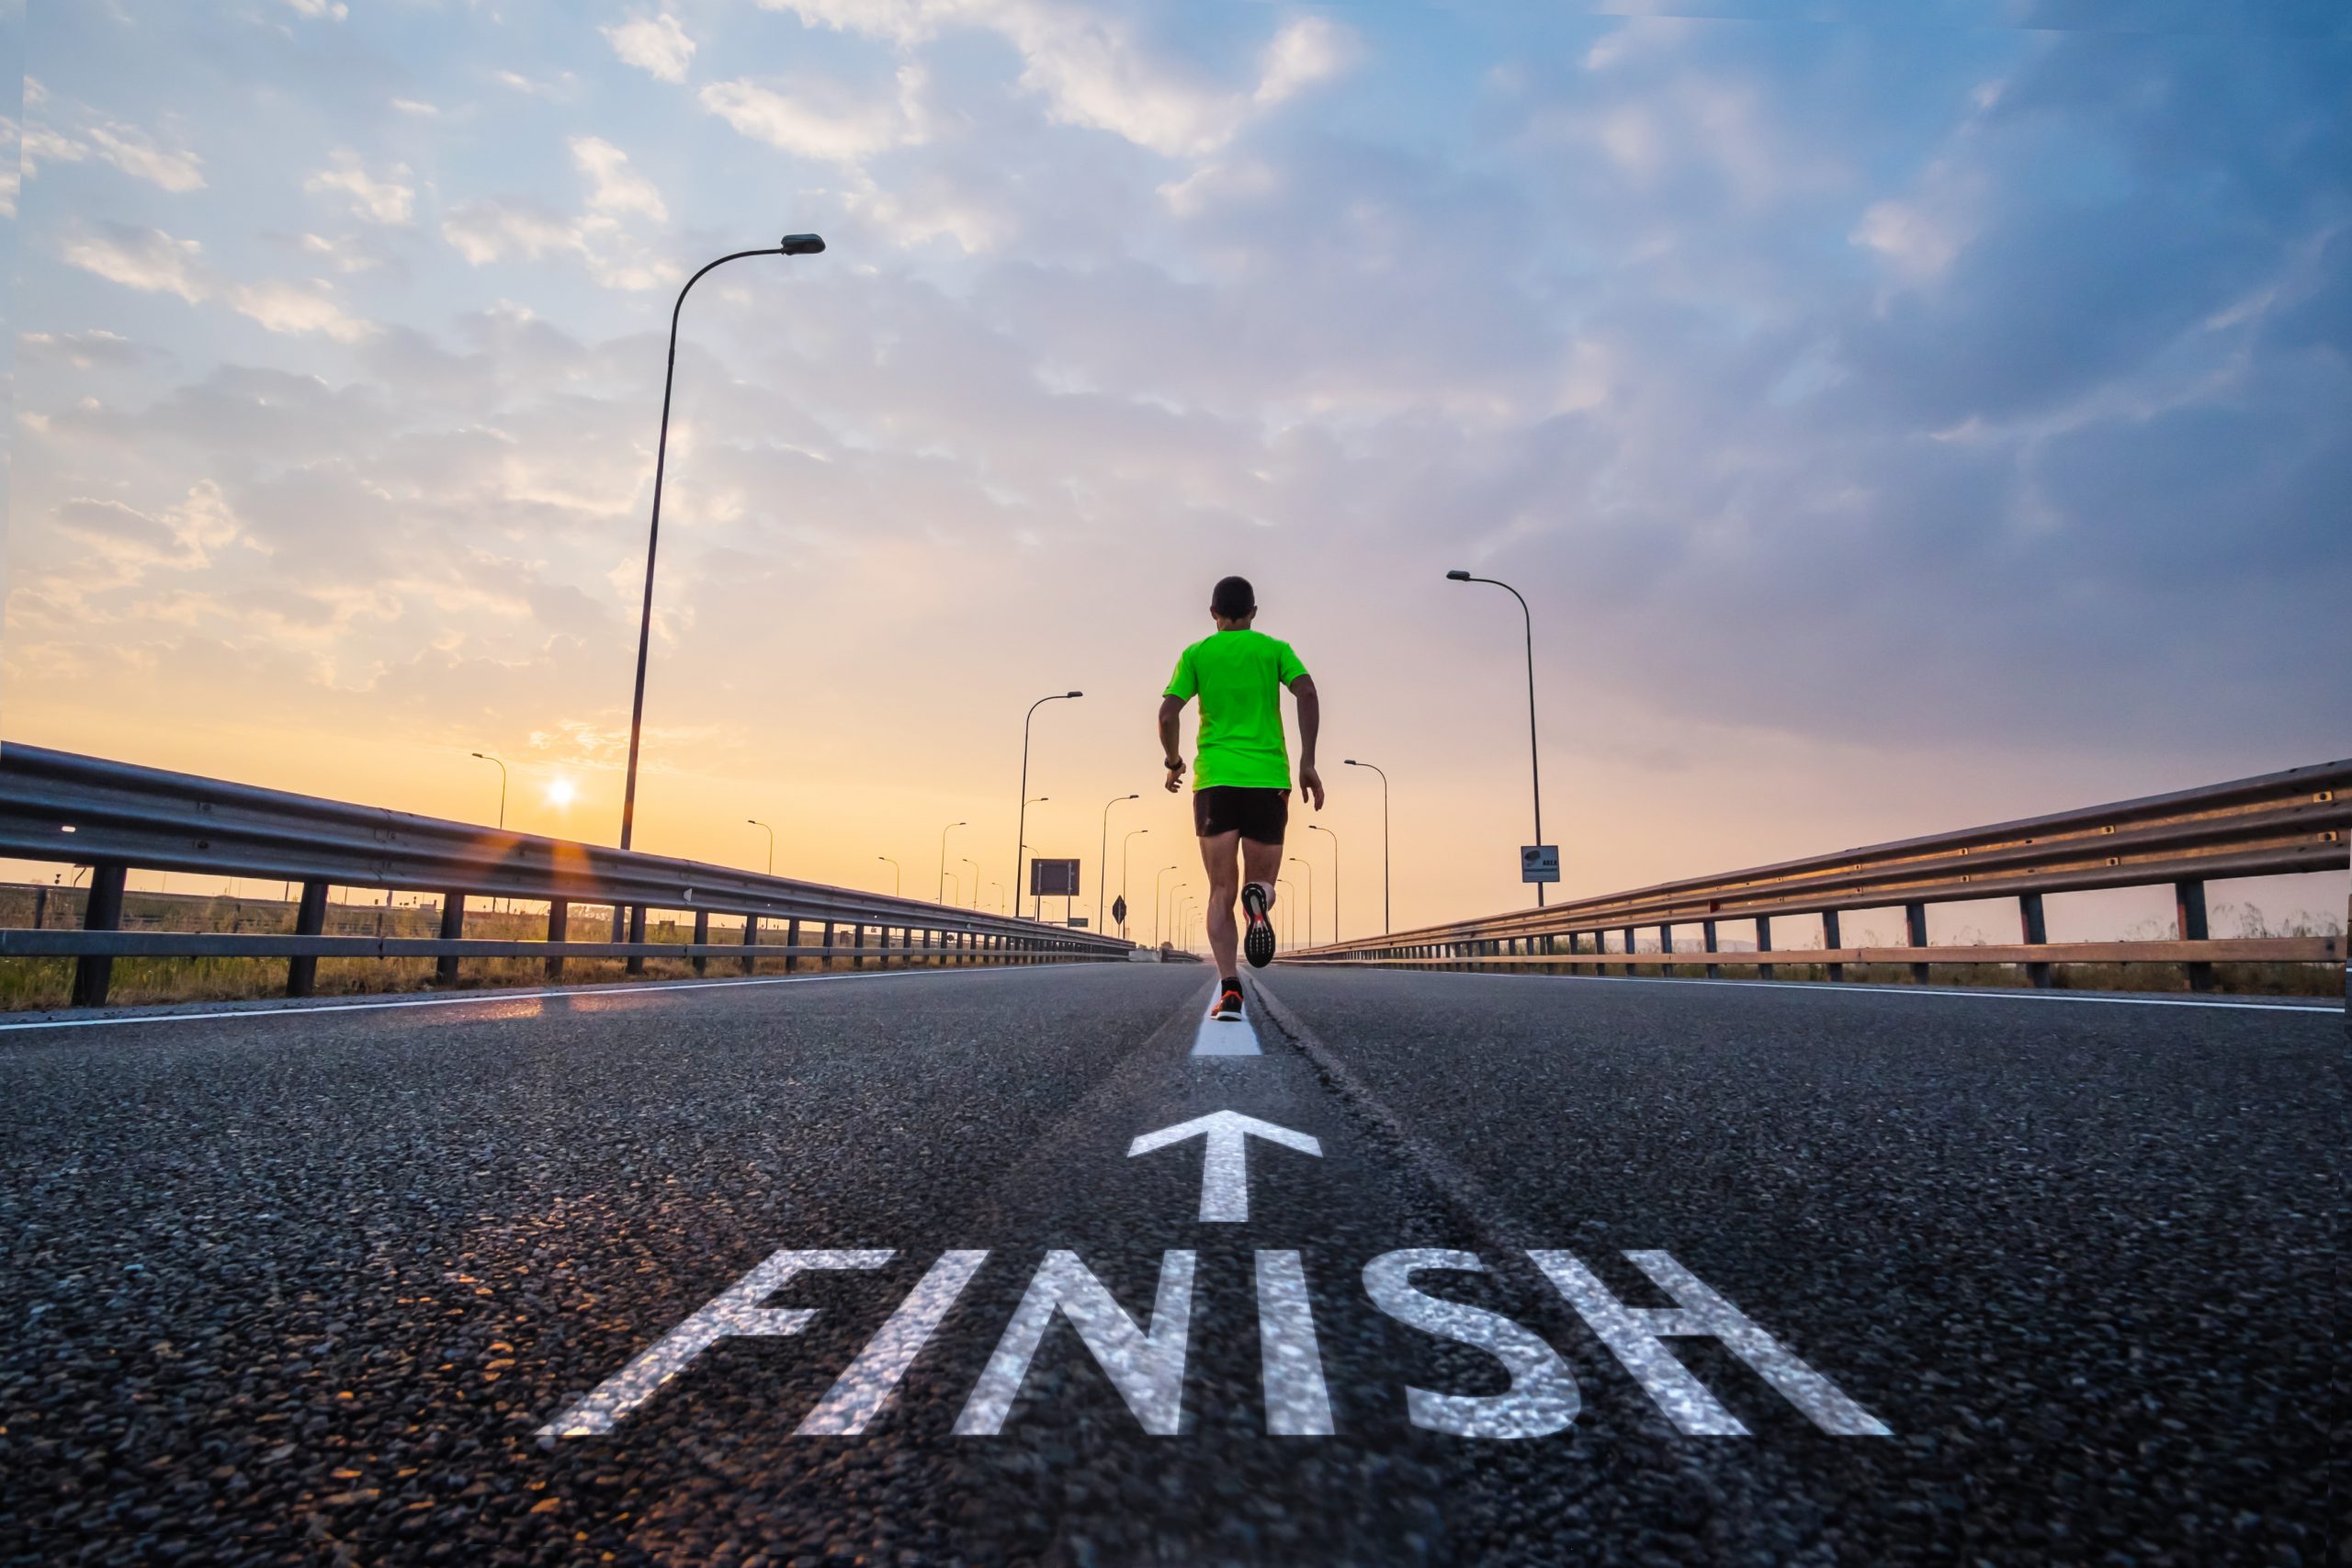 Sales Enablement teams help the entire team reach the finish line